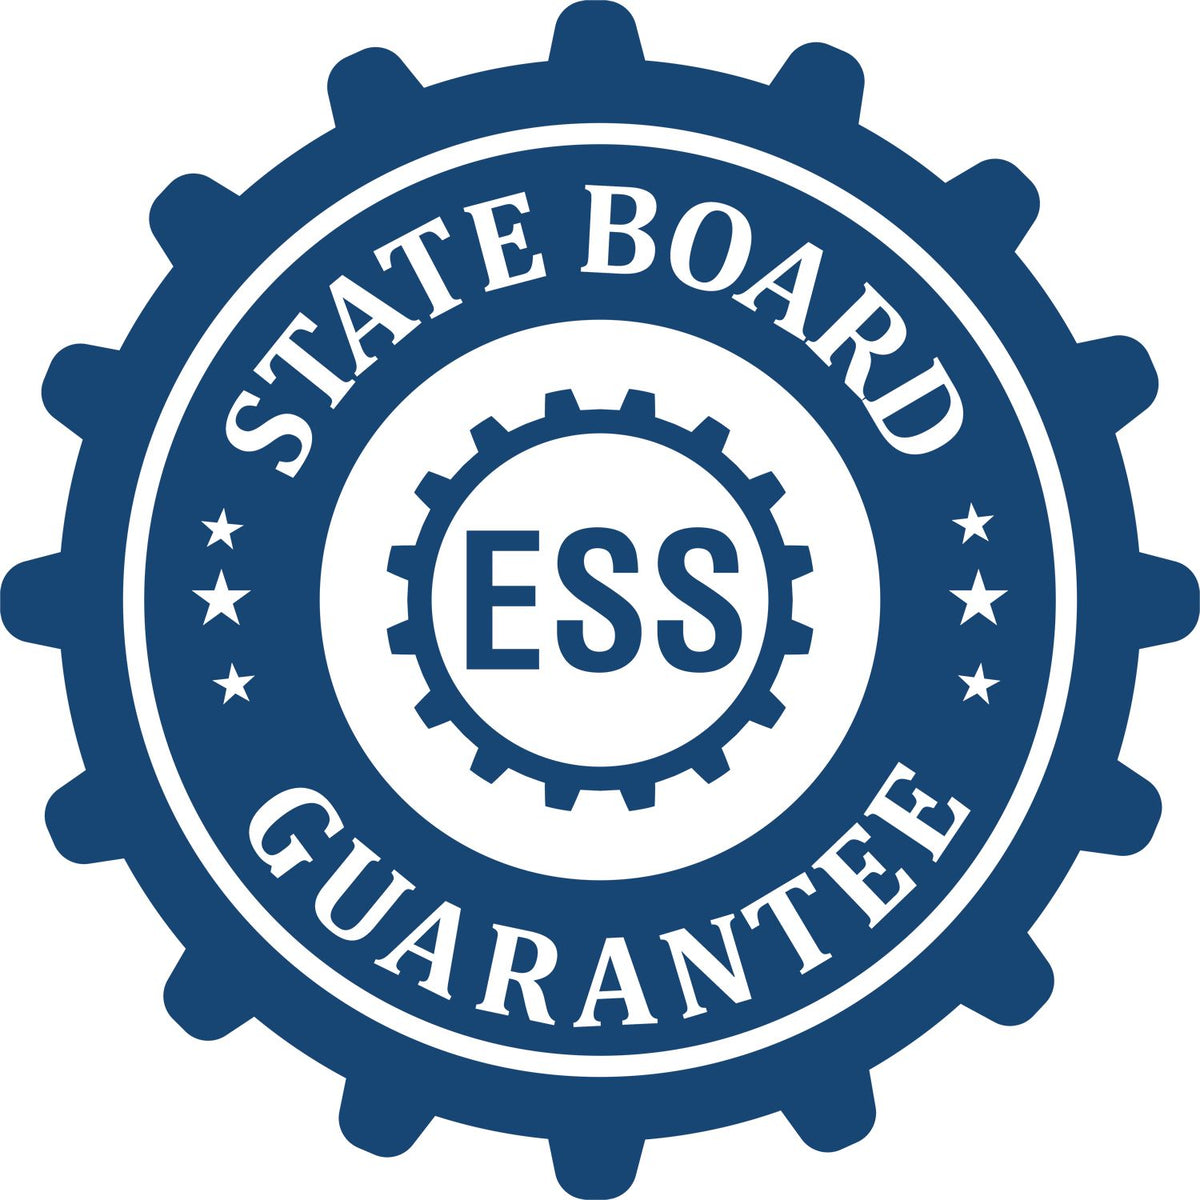 An emblem in a gear shape illustrating a state board guarantee for the Wooden Handle Illinois Rectangular Notary Public Stamp product.